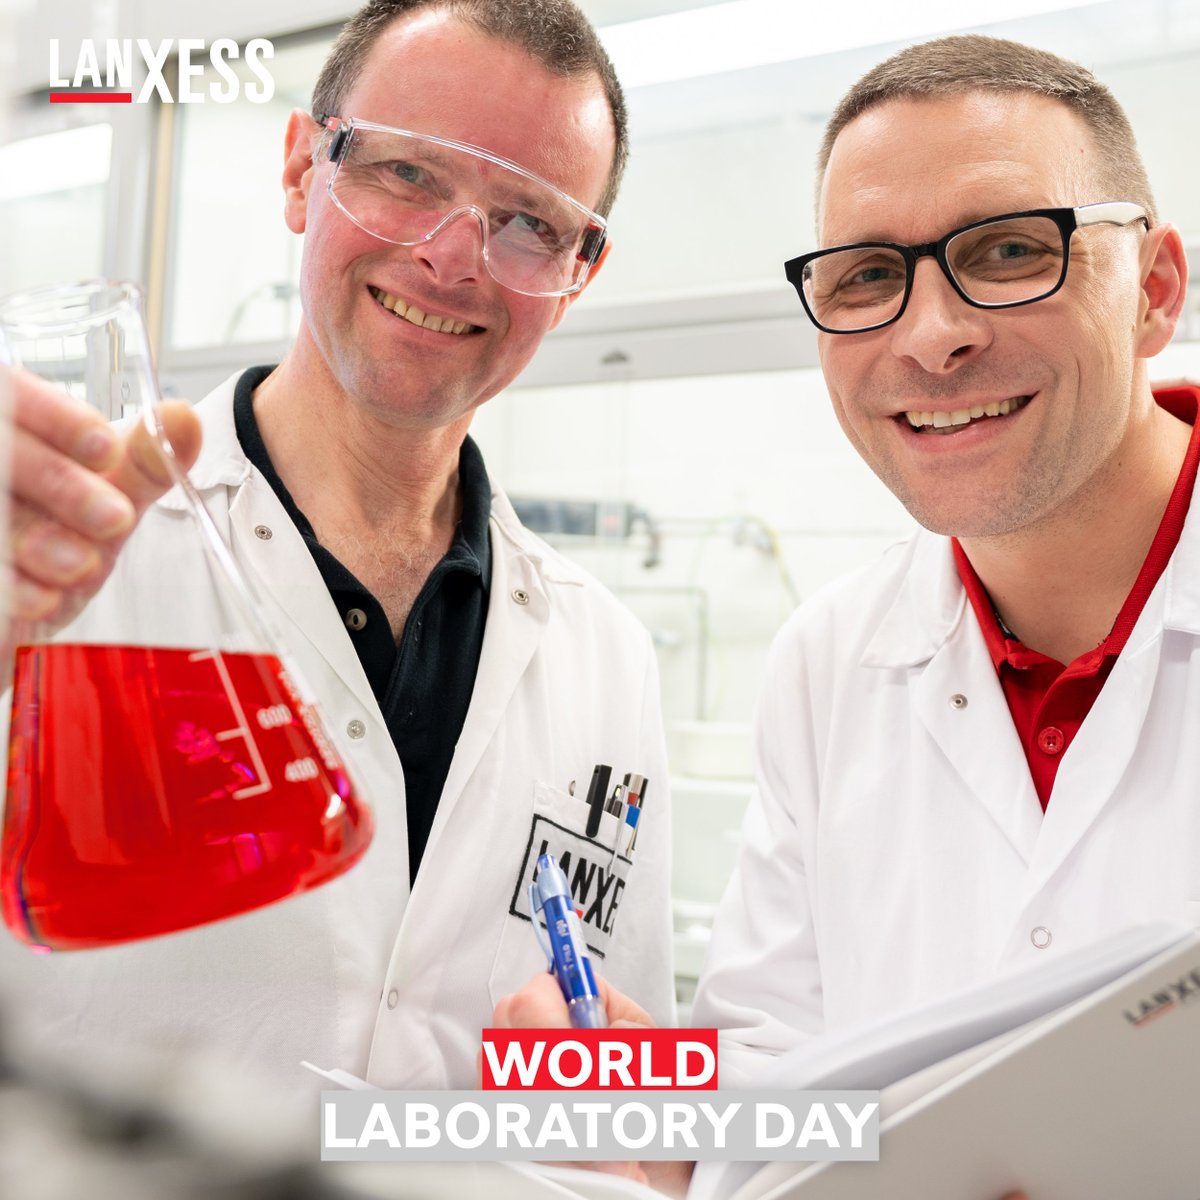 🎉🔬 Celebrate #WorldLaboratoryDay with us! Honoring our lab heroes—researchers & techs shaping the future. Your dedication enables innovation & safety.